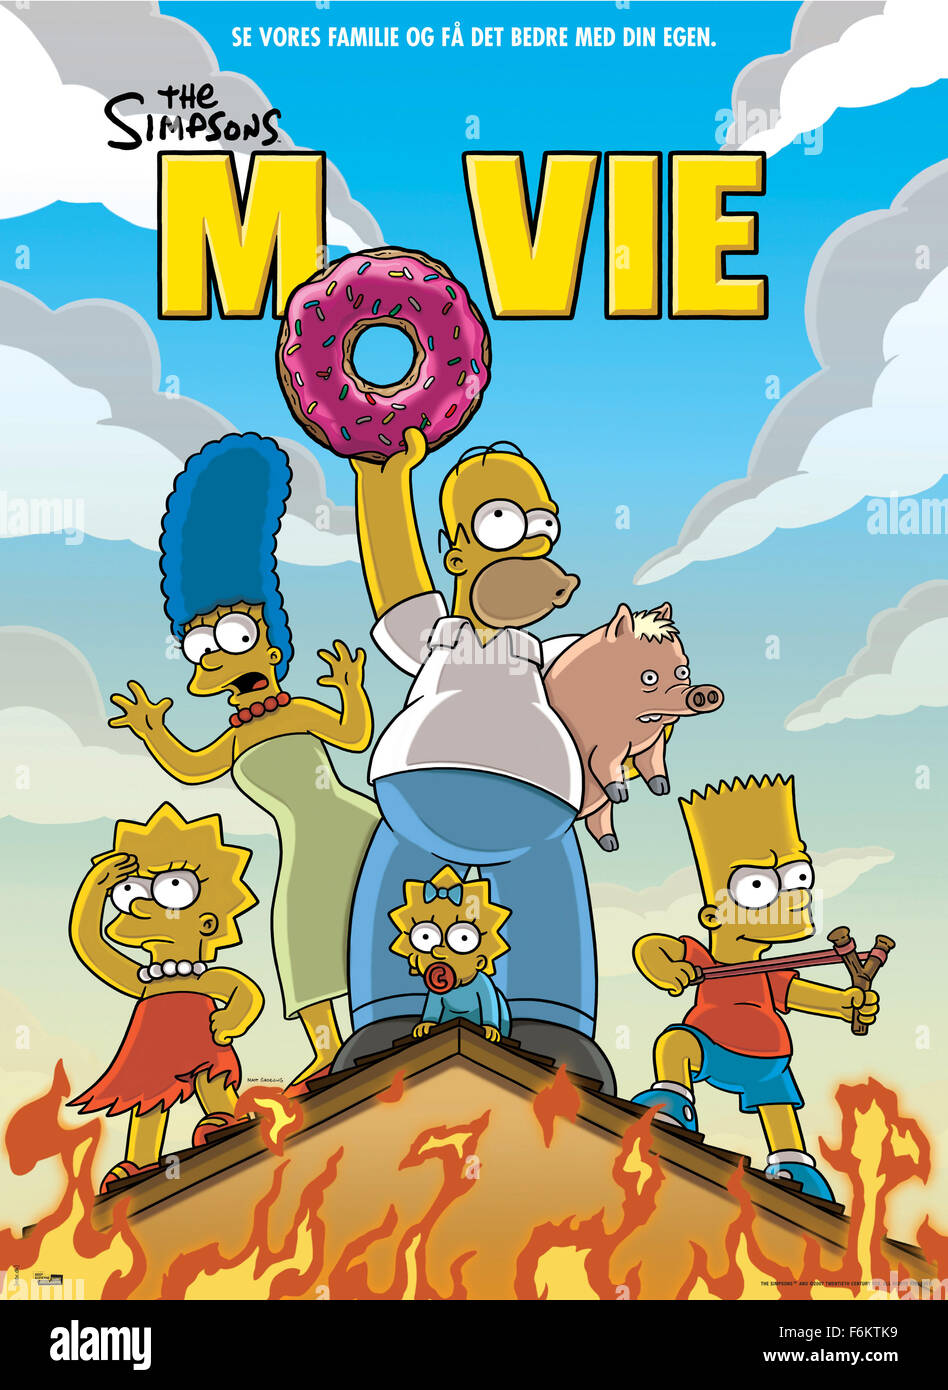 RELEASE DATE: July 27, 2007. MOVIE TITLE: The Simpsons Movie - STUDIO: Akom Production Company. ORIGINAL ARTWORK BY: Matt Groening. PLOT: After Homer accidentally pollutes the town's water supply, Springfield is encased in a gigantic dome by the EPA and the Simpsons family are declared fugitives. PICTURED: Movie Poster. Stock Photo